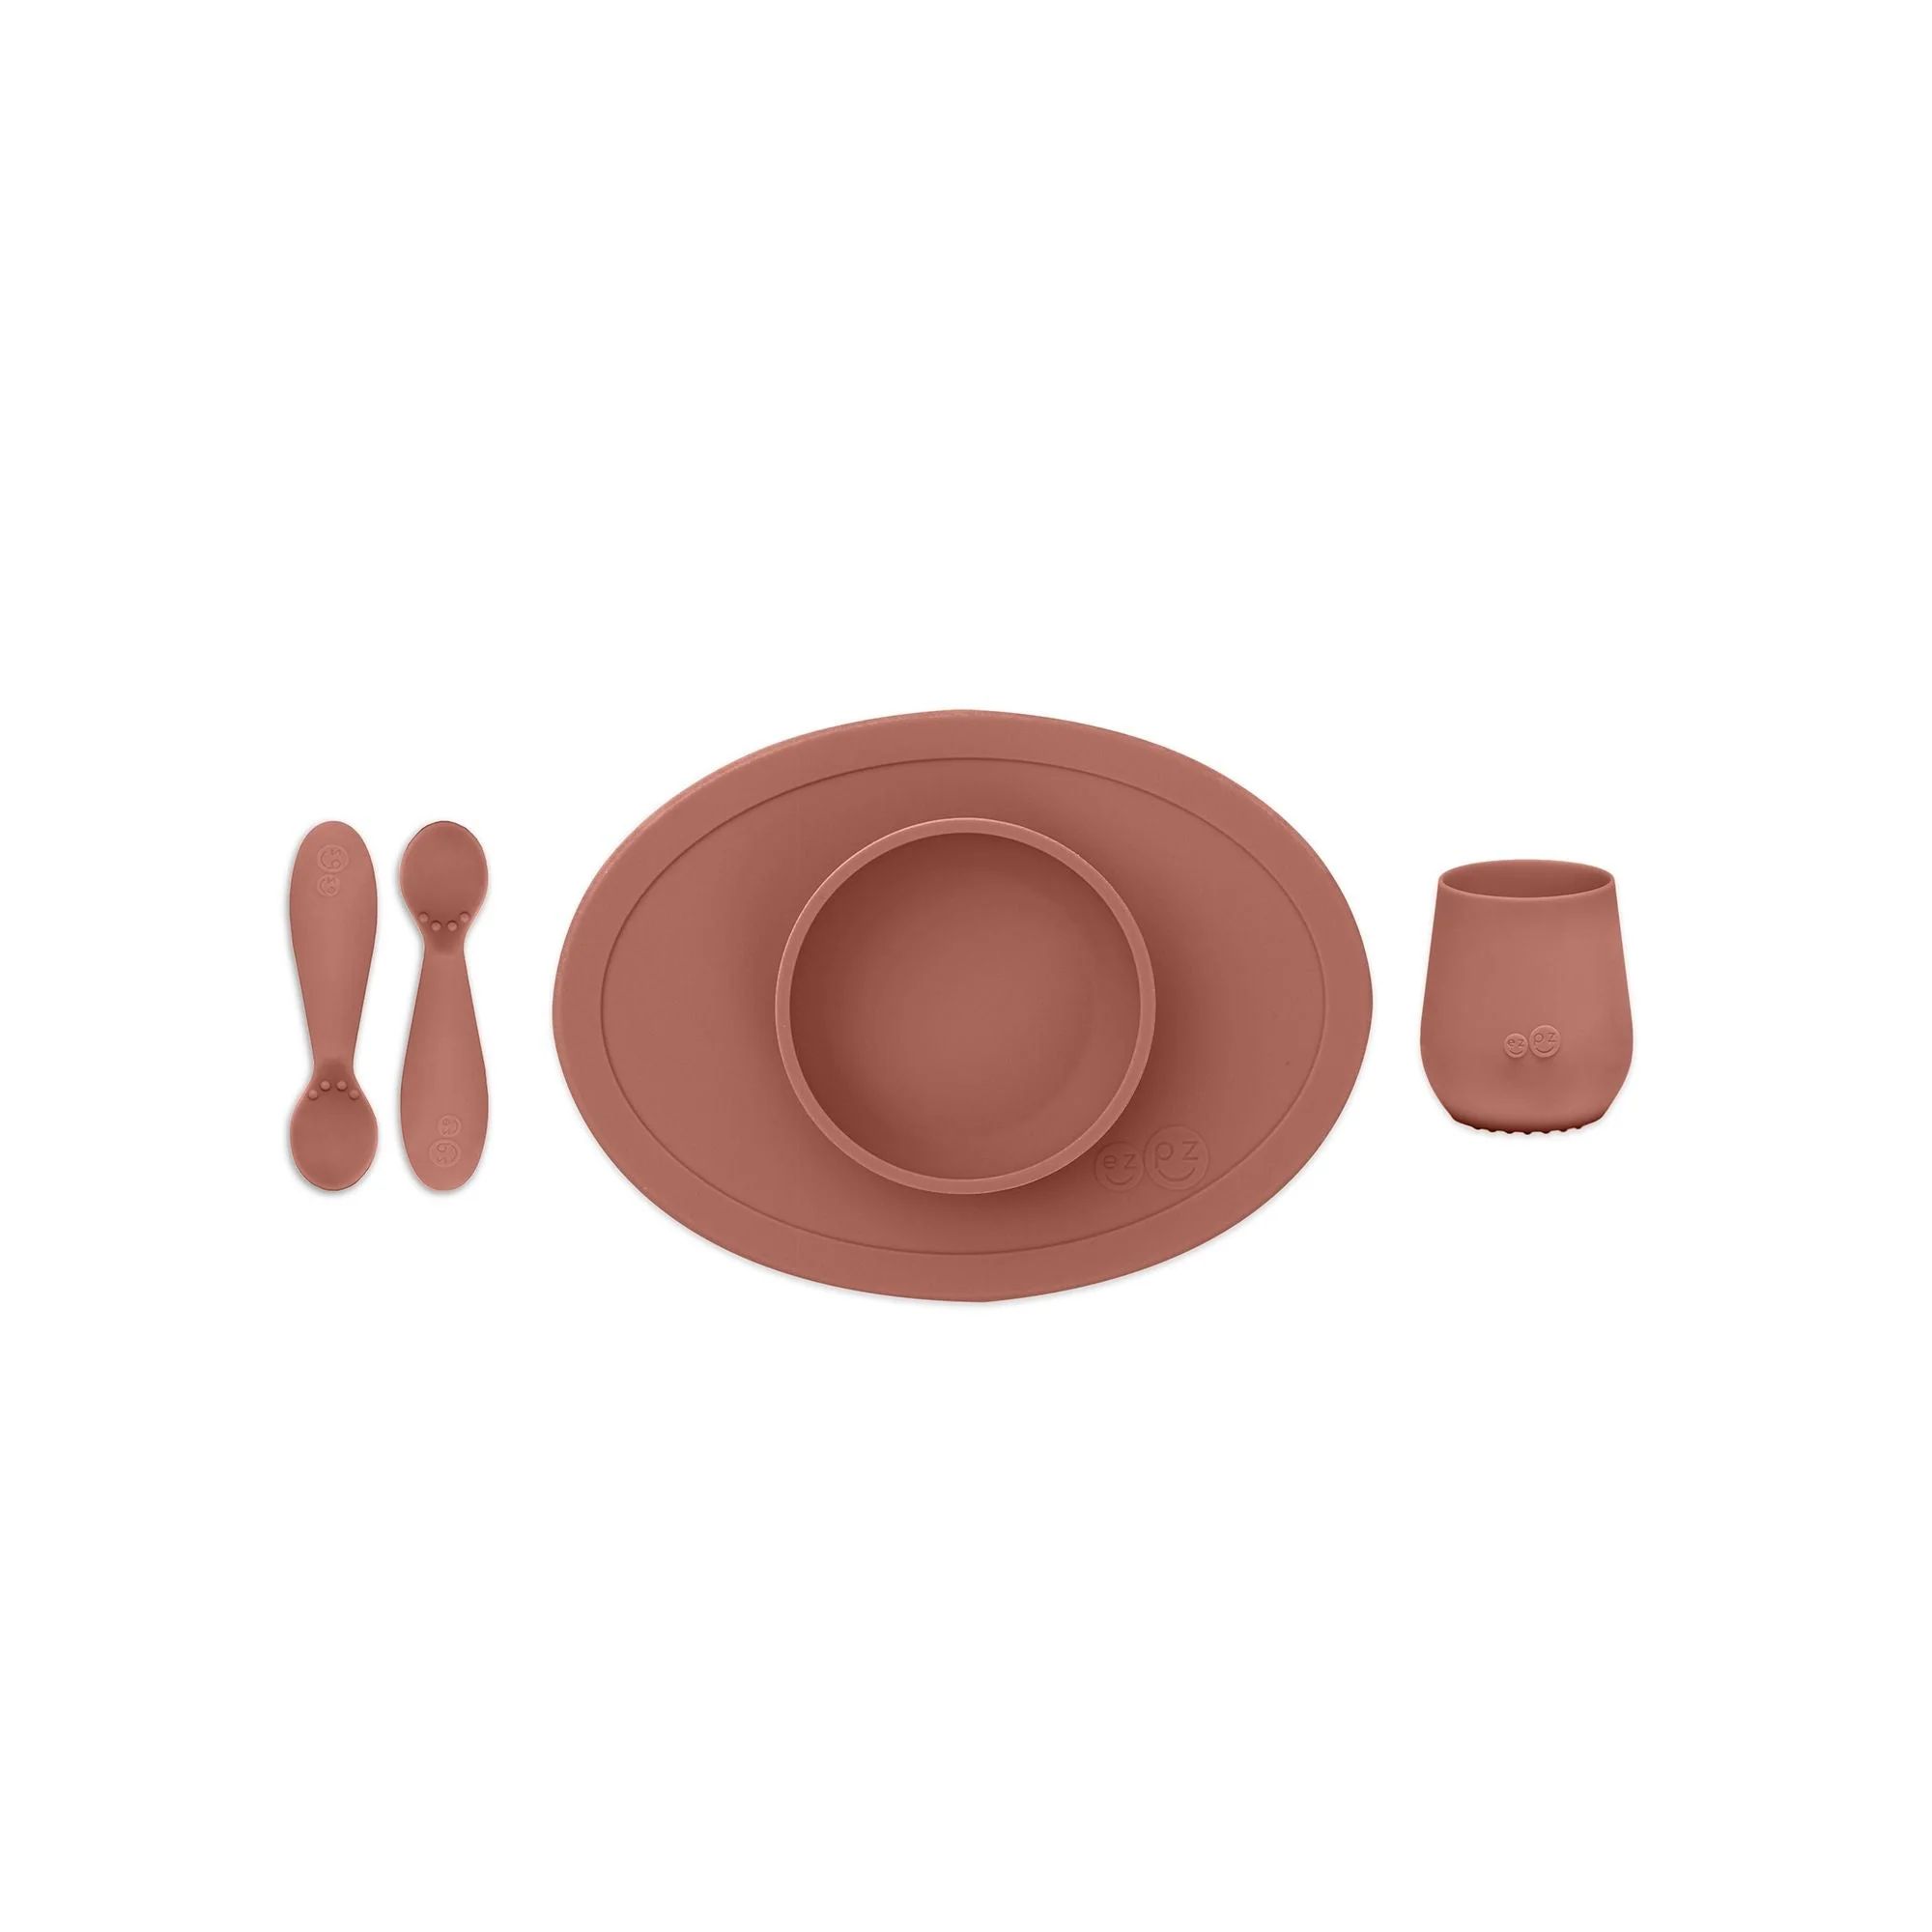 First Foods Set - Sienna | Project Nursery